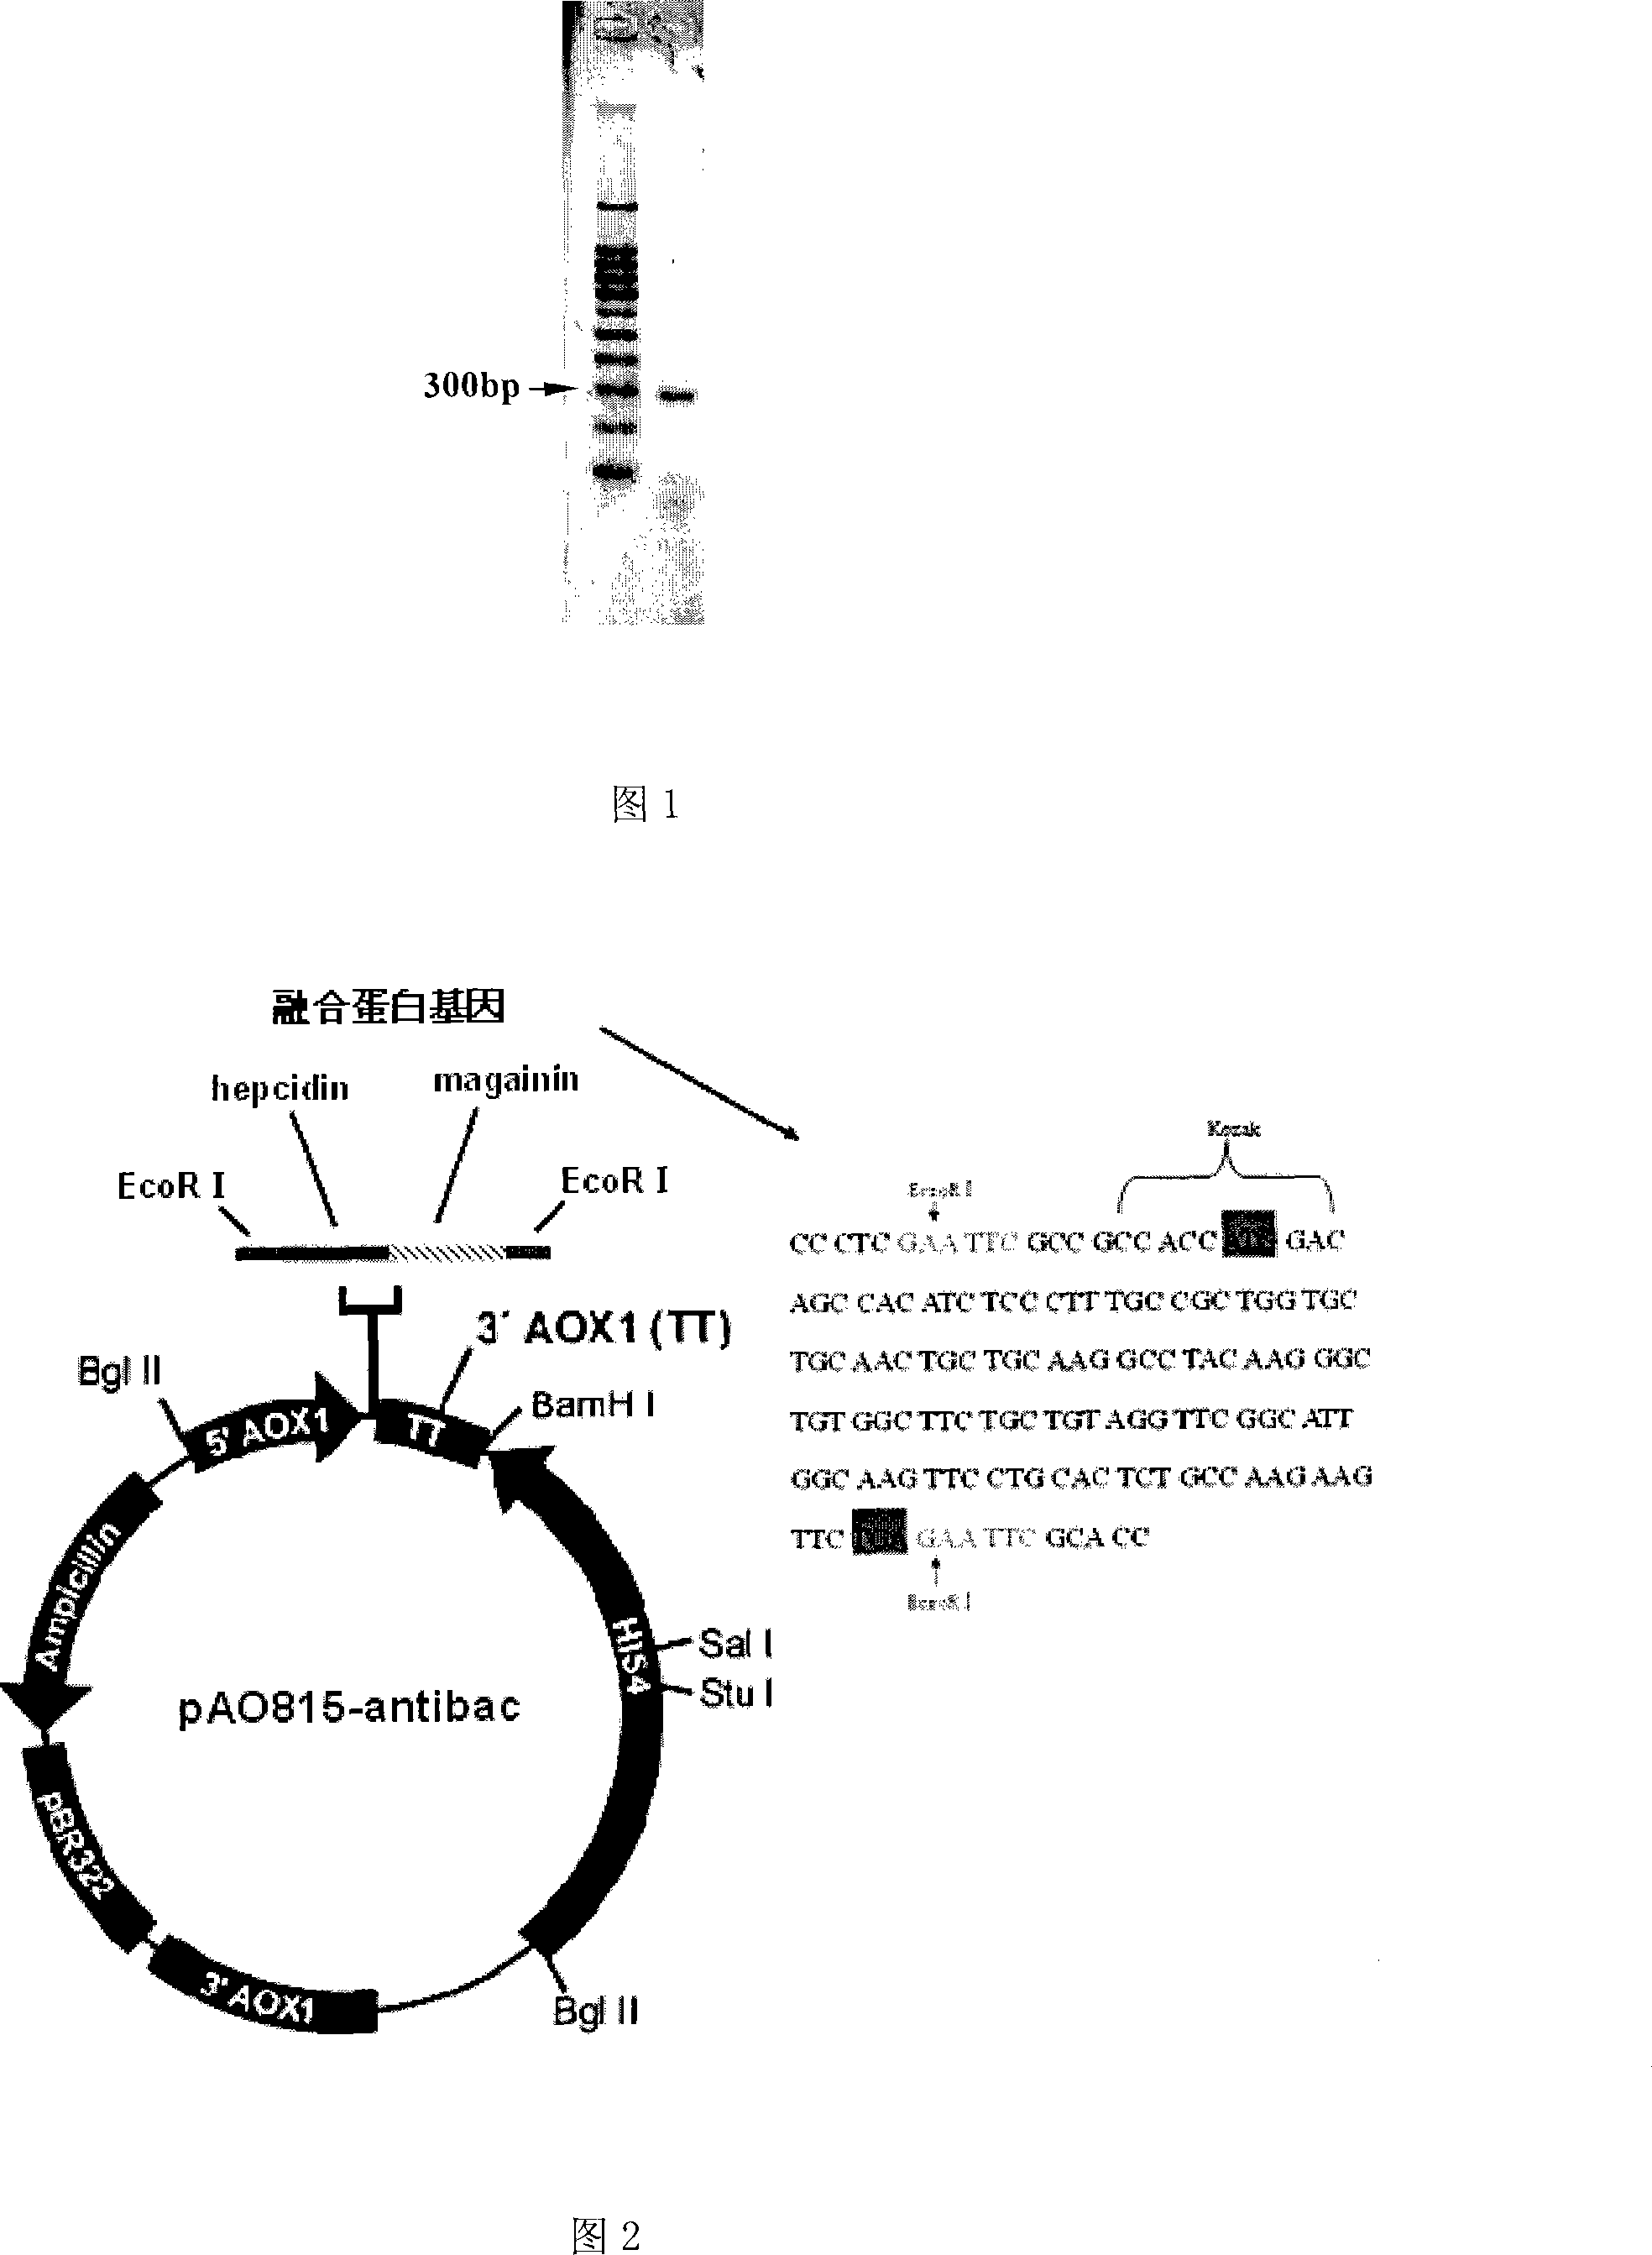 Fusion protein having antibiotic function and uses thereof